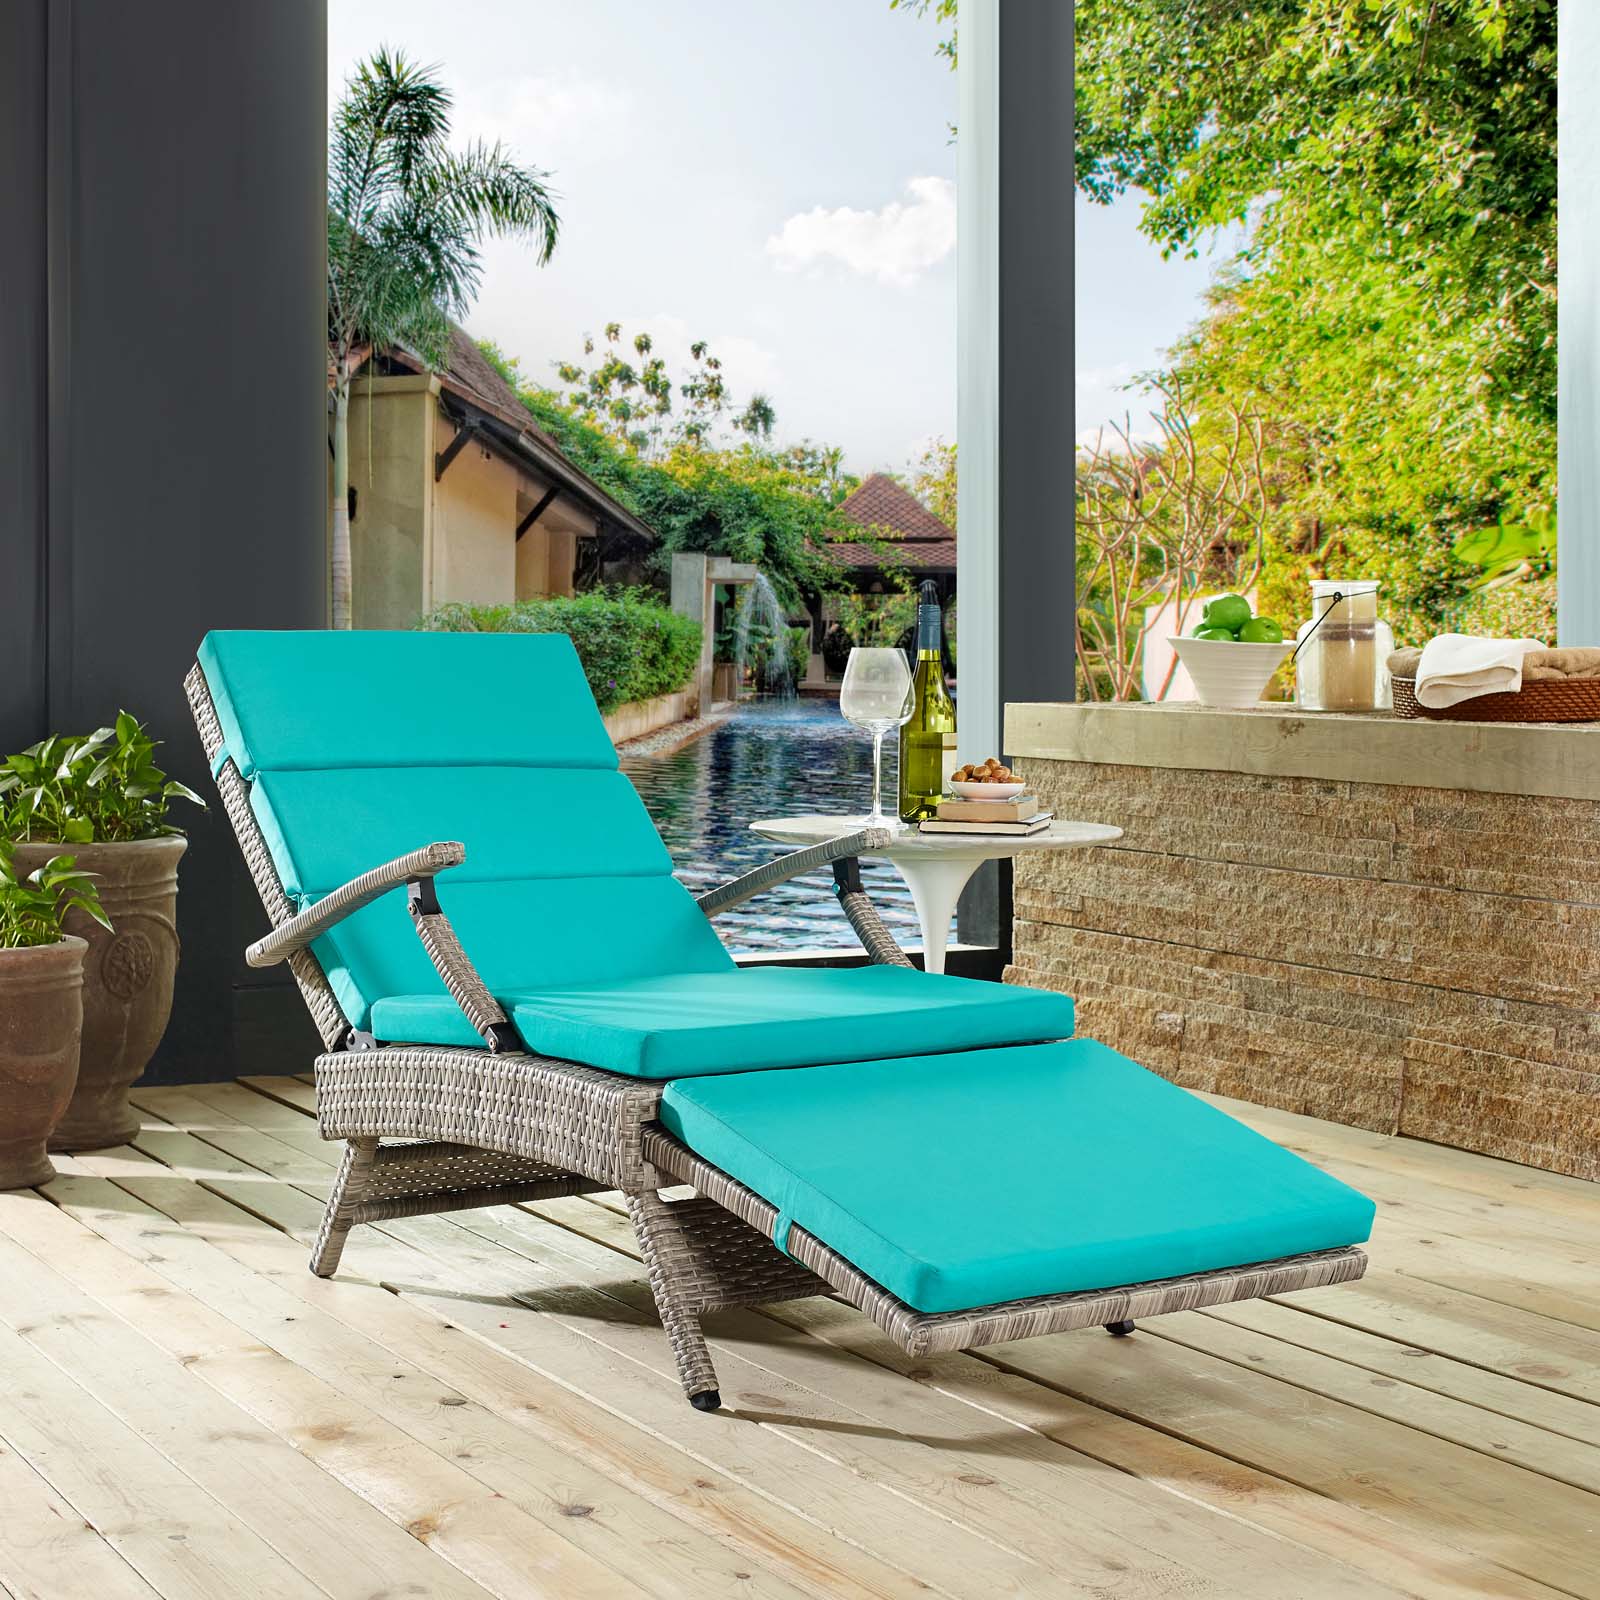 Modway Envisage Chaise Outdoor Patio Wicker Rattan Lounge Chair in Light Gray Turquoise - image 1 of 10